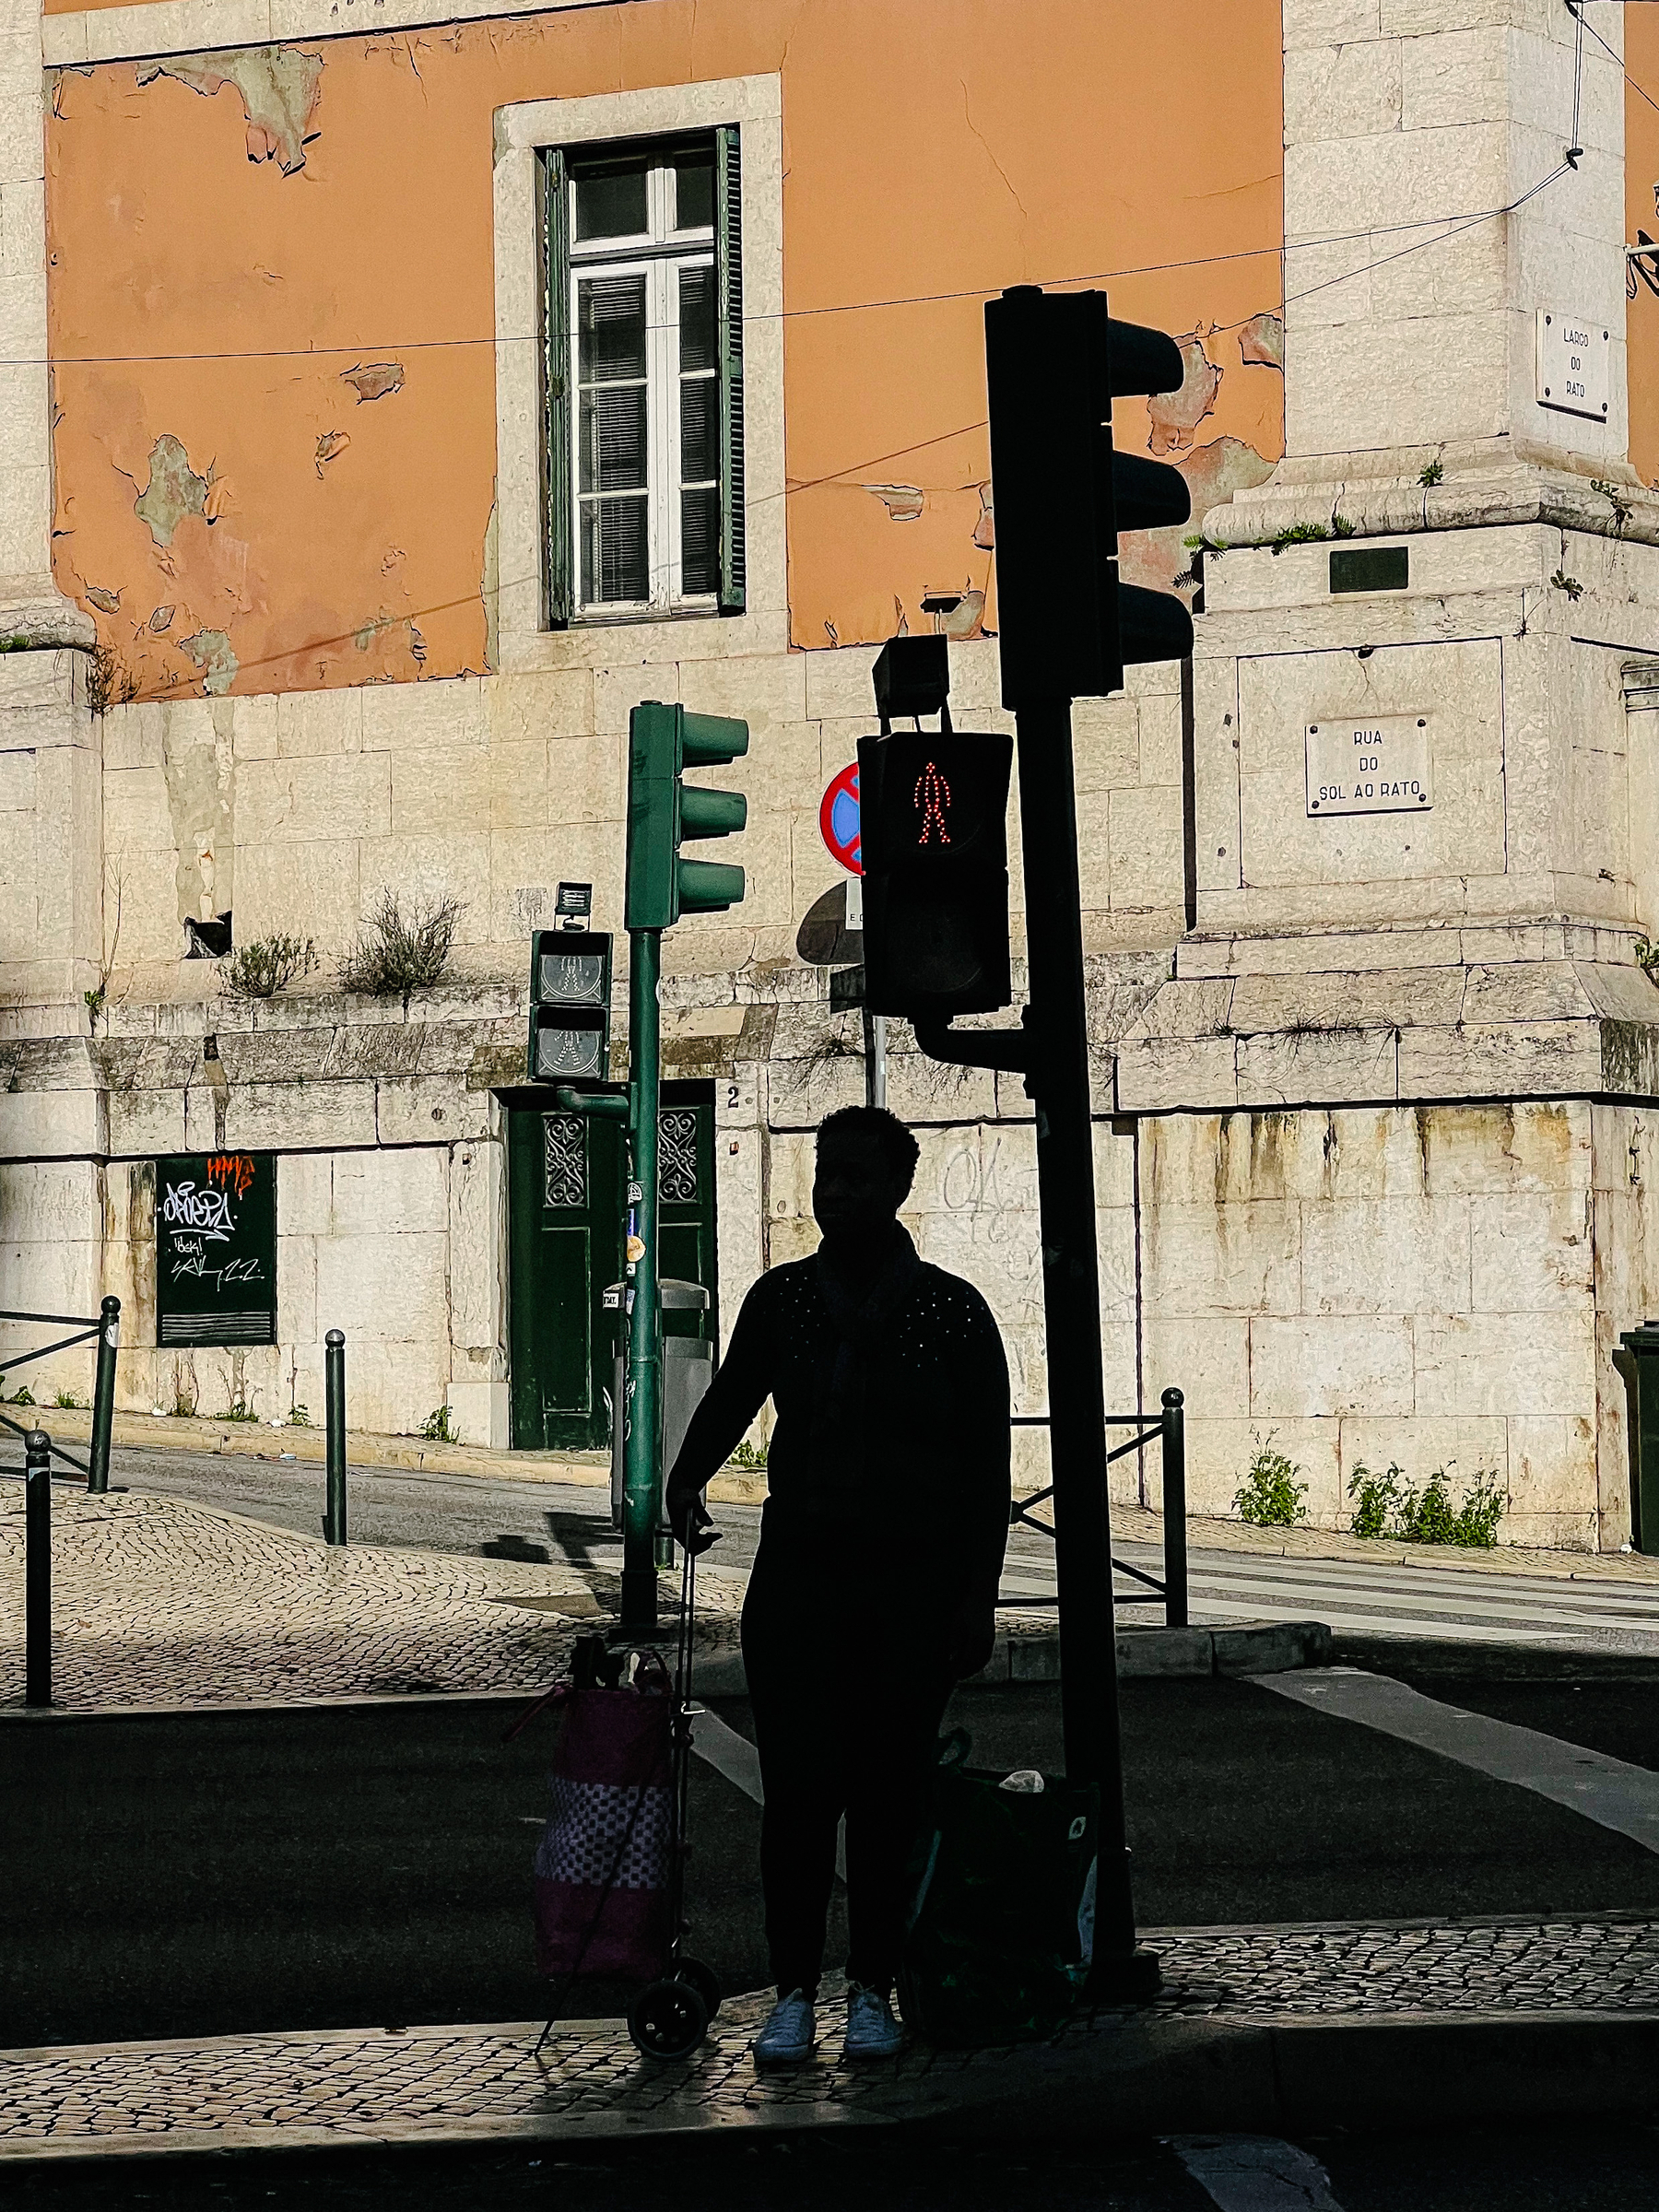 A woman waits for the green light to cross the street. We can see an old building in the back and traffic lights, one with a red light. 